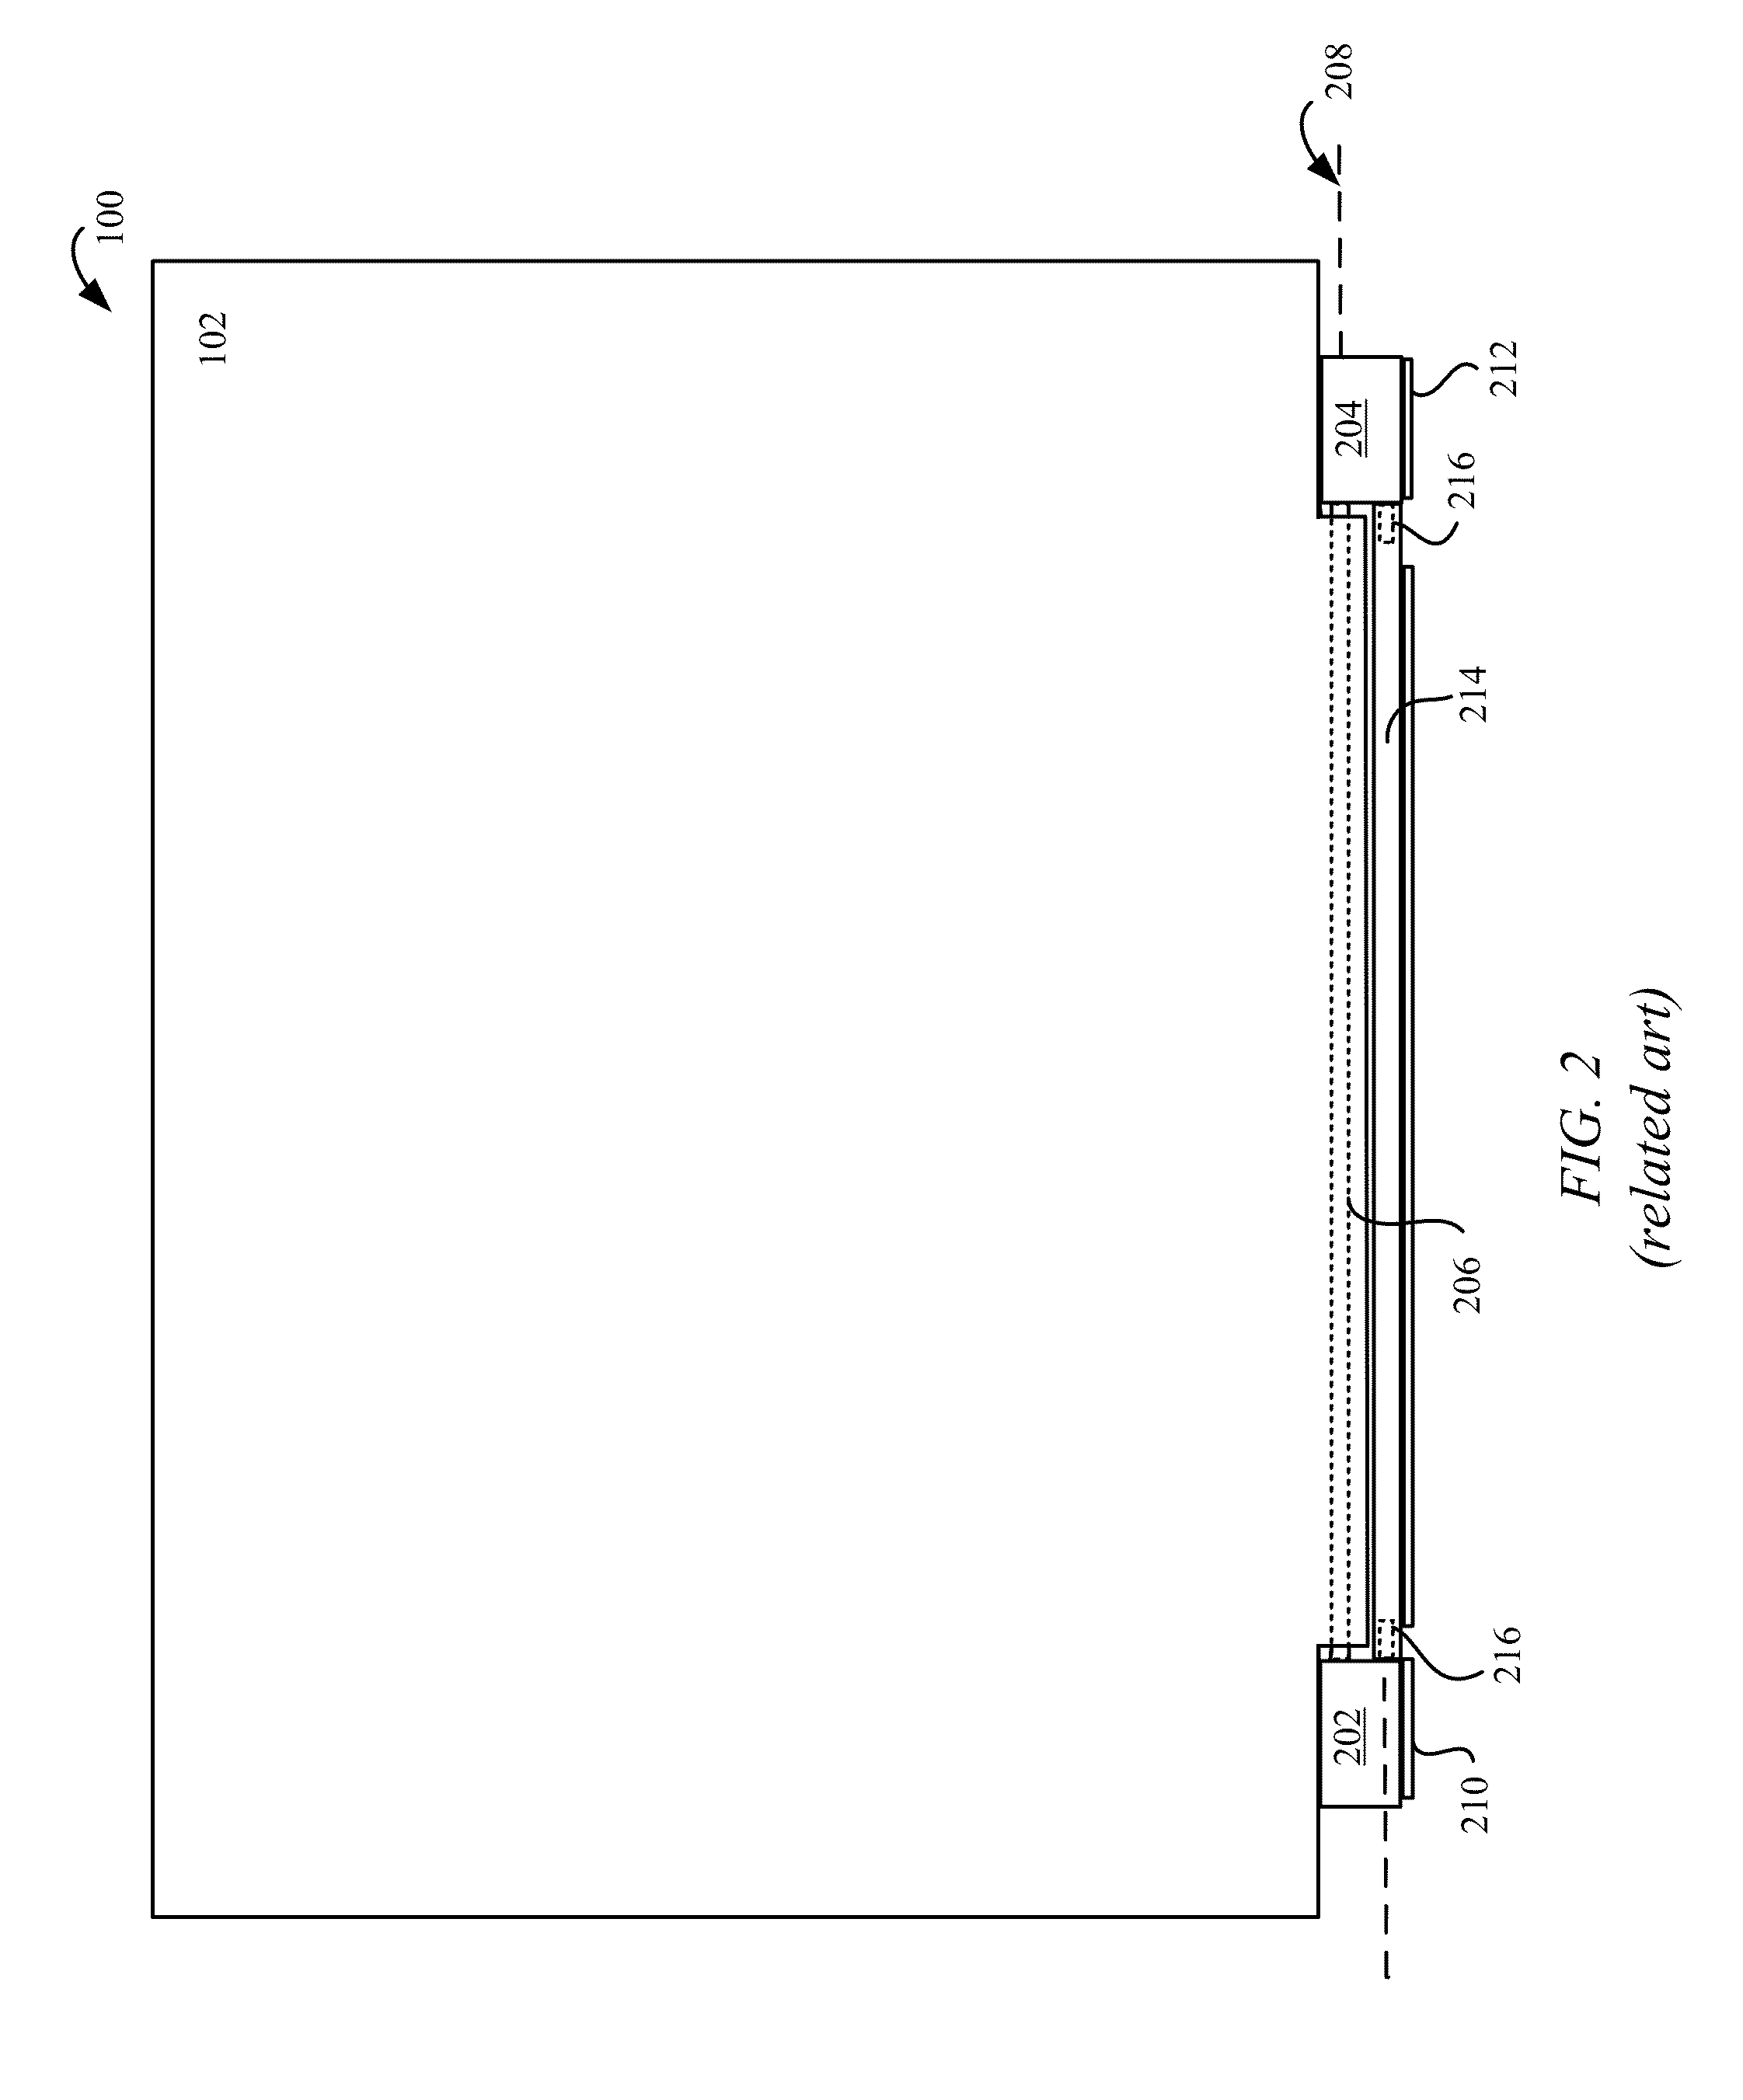 Assembly process for glue-free hinge